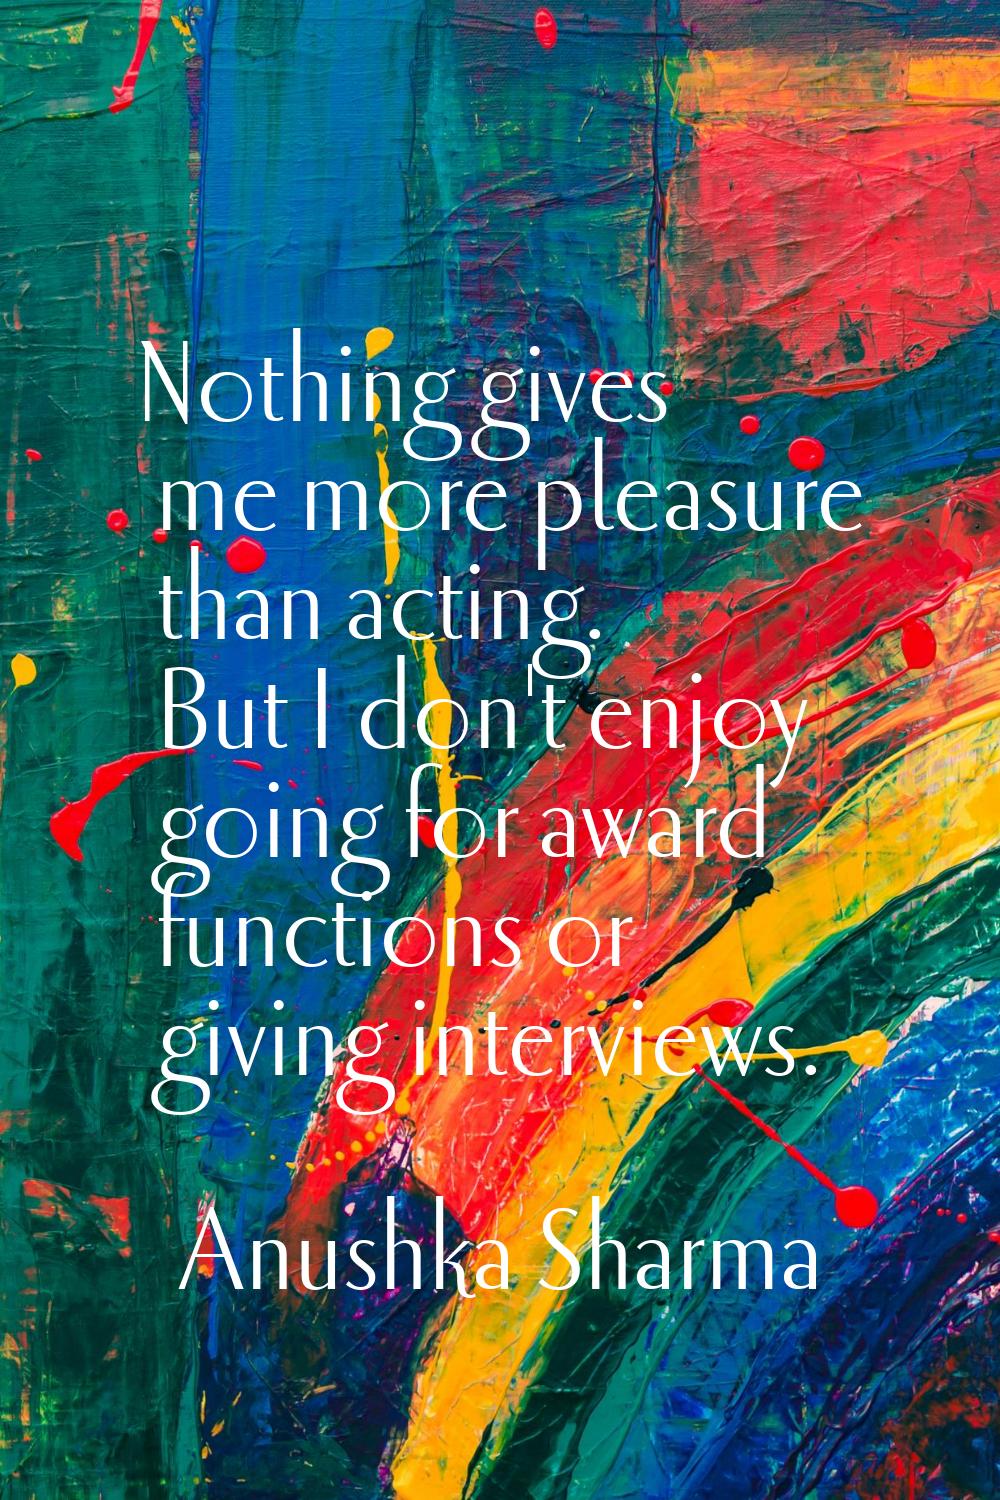 Nothing gives me more pleasure than acting. But I don't enjoy going for award functions or giving i